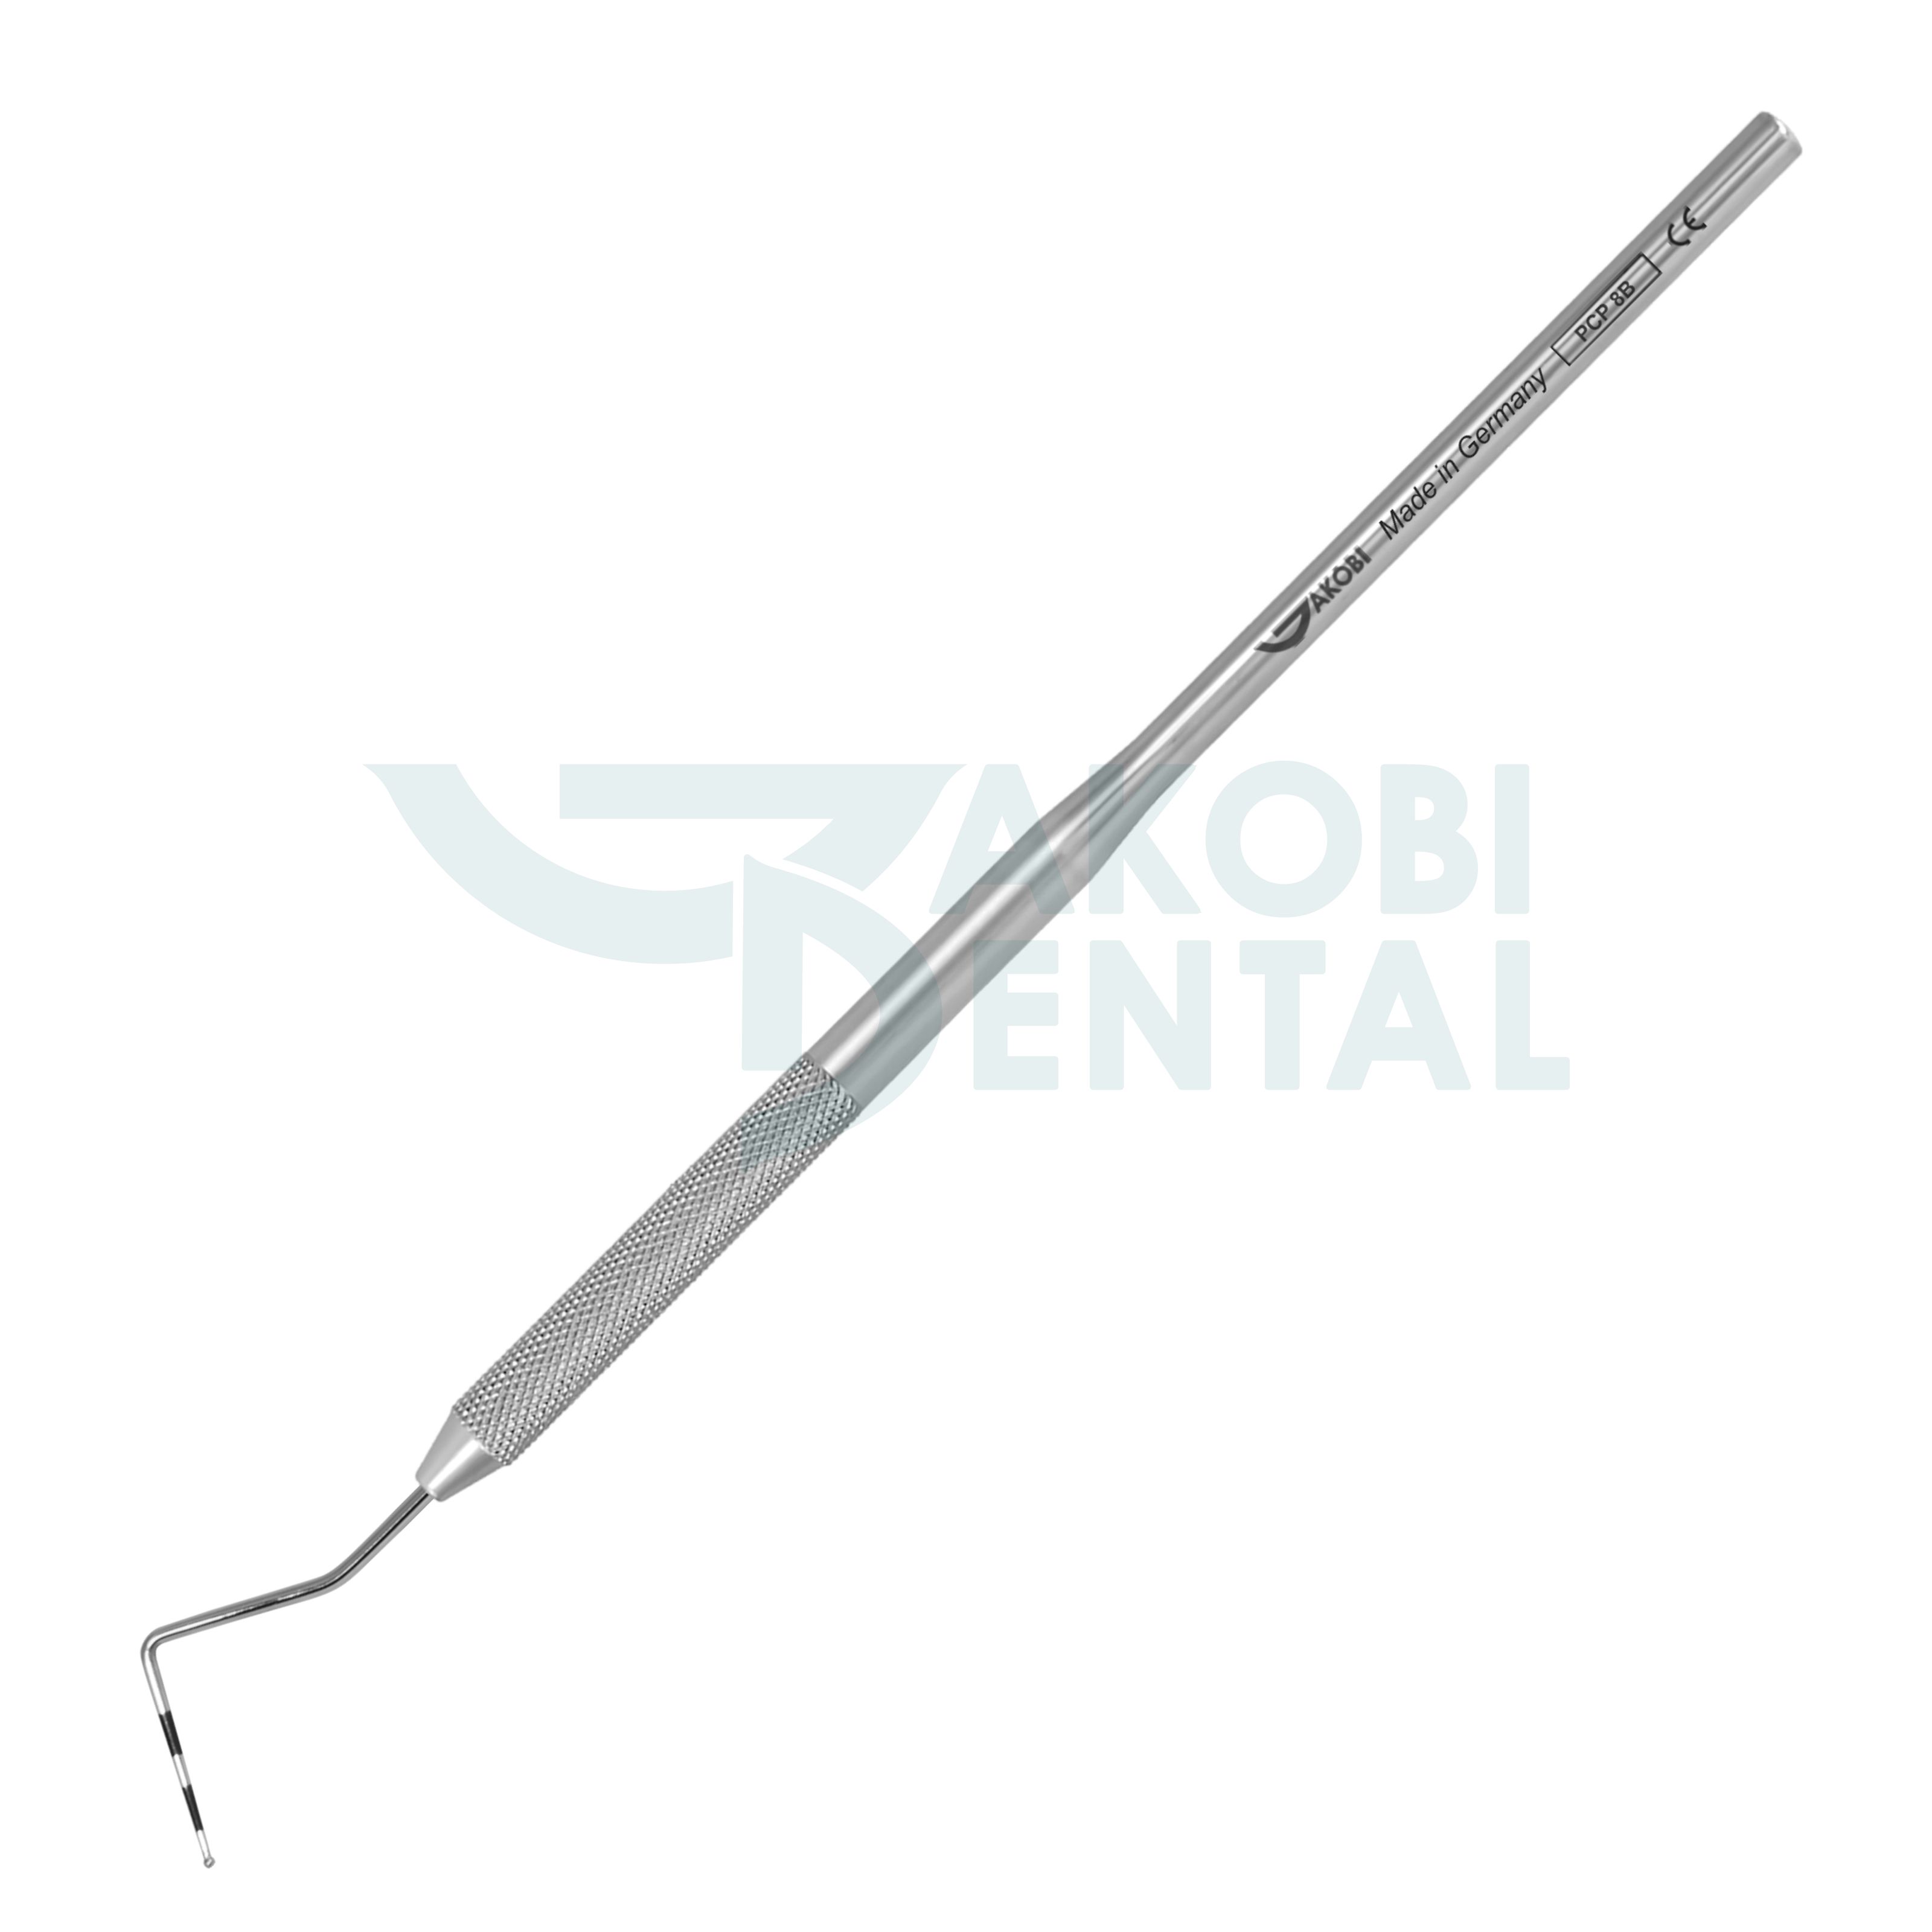 Periodontal probe PCP 8B with Ball Tip, Standard handle # 30